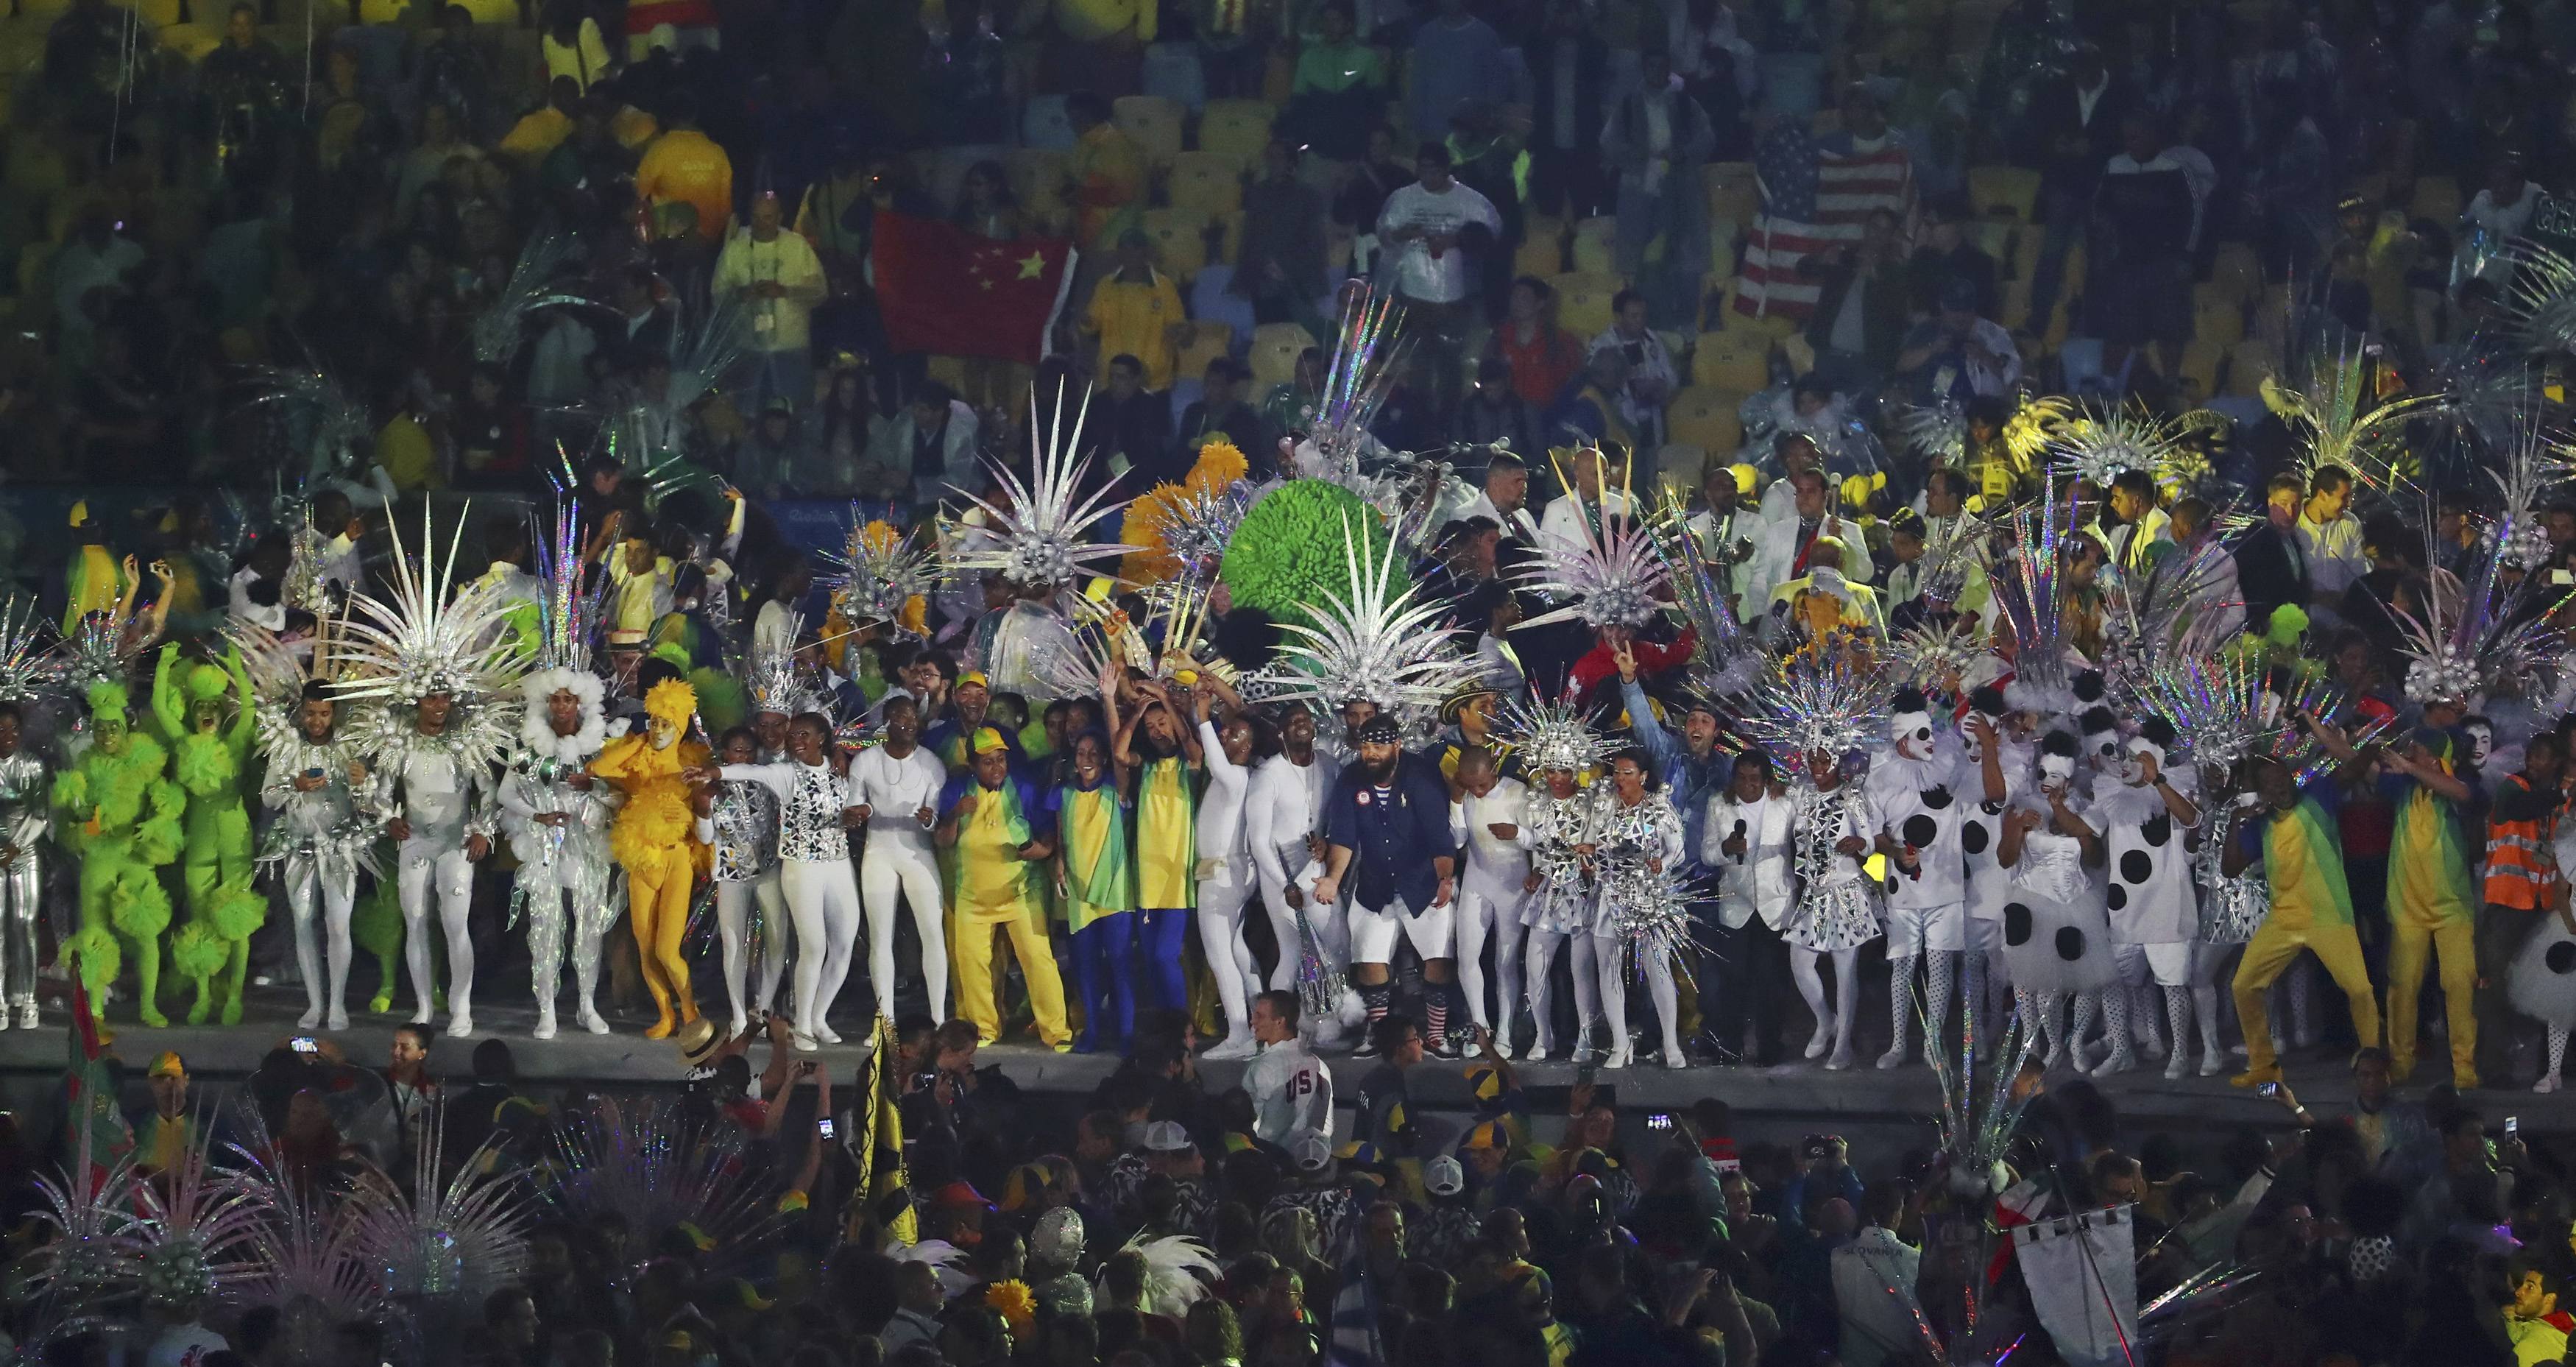 2016 Rio Olympics - Closing ceremony - Maracana - Rio de Janeiro, Brazil - 21/08/2016. Athletes dance with dancers during the closing ceremony. REUTERS/Yves Herman FOR EDITORIAL USE ONLY. NOT FOR SALE FOR MARKETING OR ADVERTISING CAMPAIGNS.